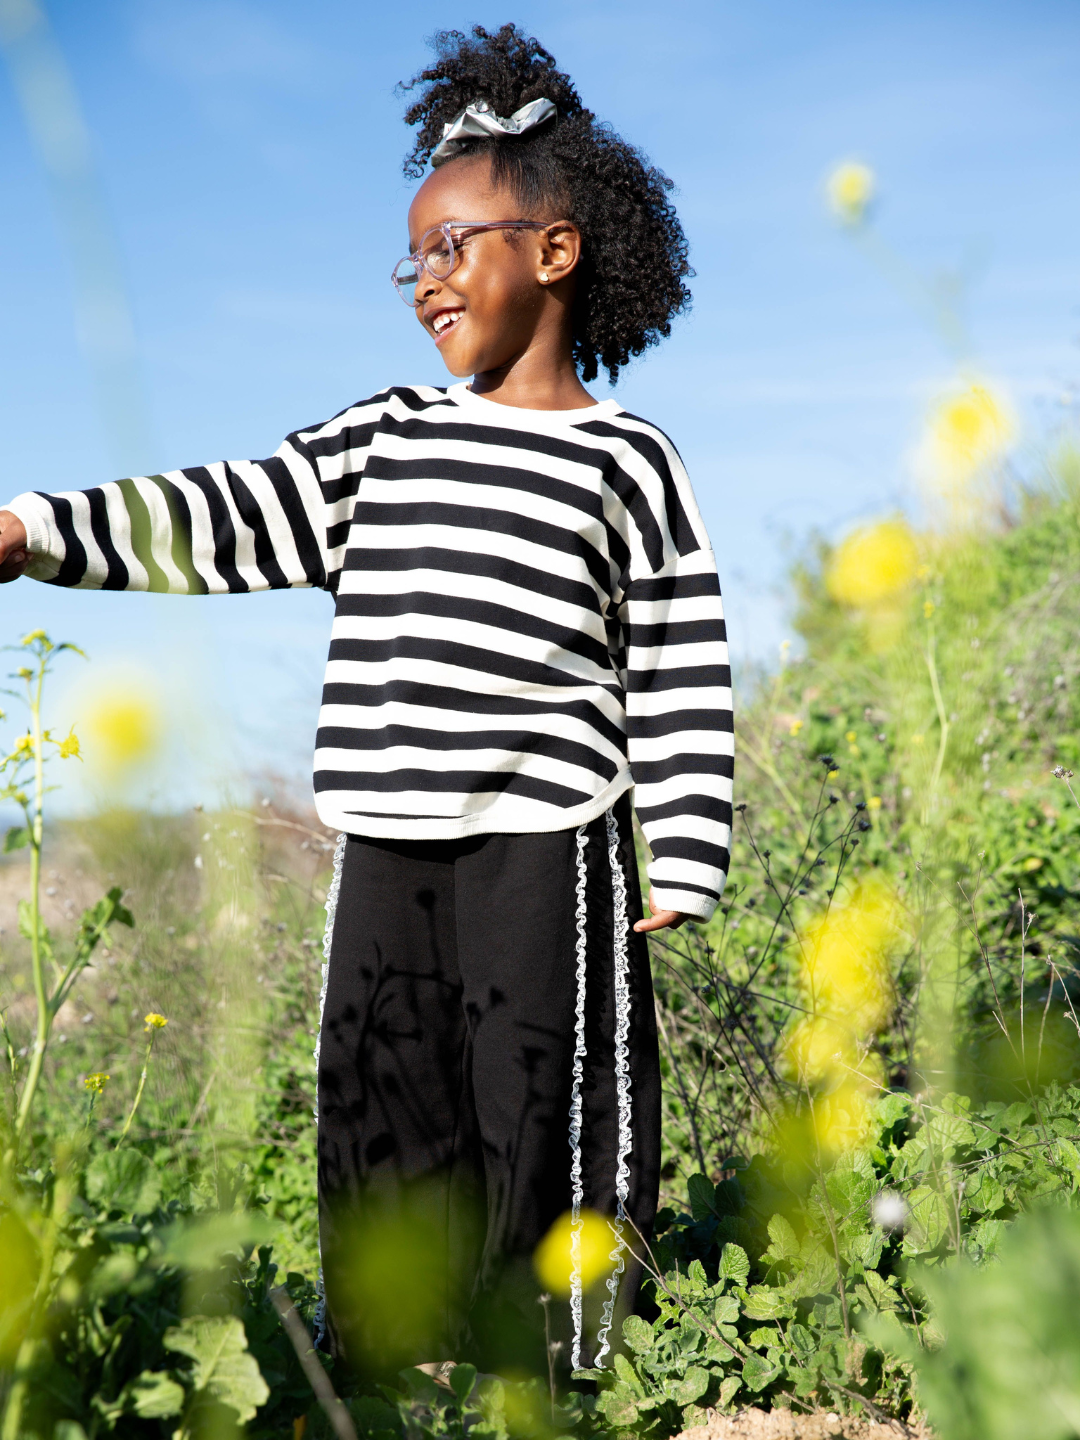 Child wearing the perfect stripey longsleeve tee with black and cream horizontal stripes. She wears black sweatpants with two ruffled stripes down the side, pink glasses, and a silver scrunchie in her curly hair. She is smiling and standing in a green field with yellow flowers and blue sky.